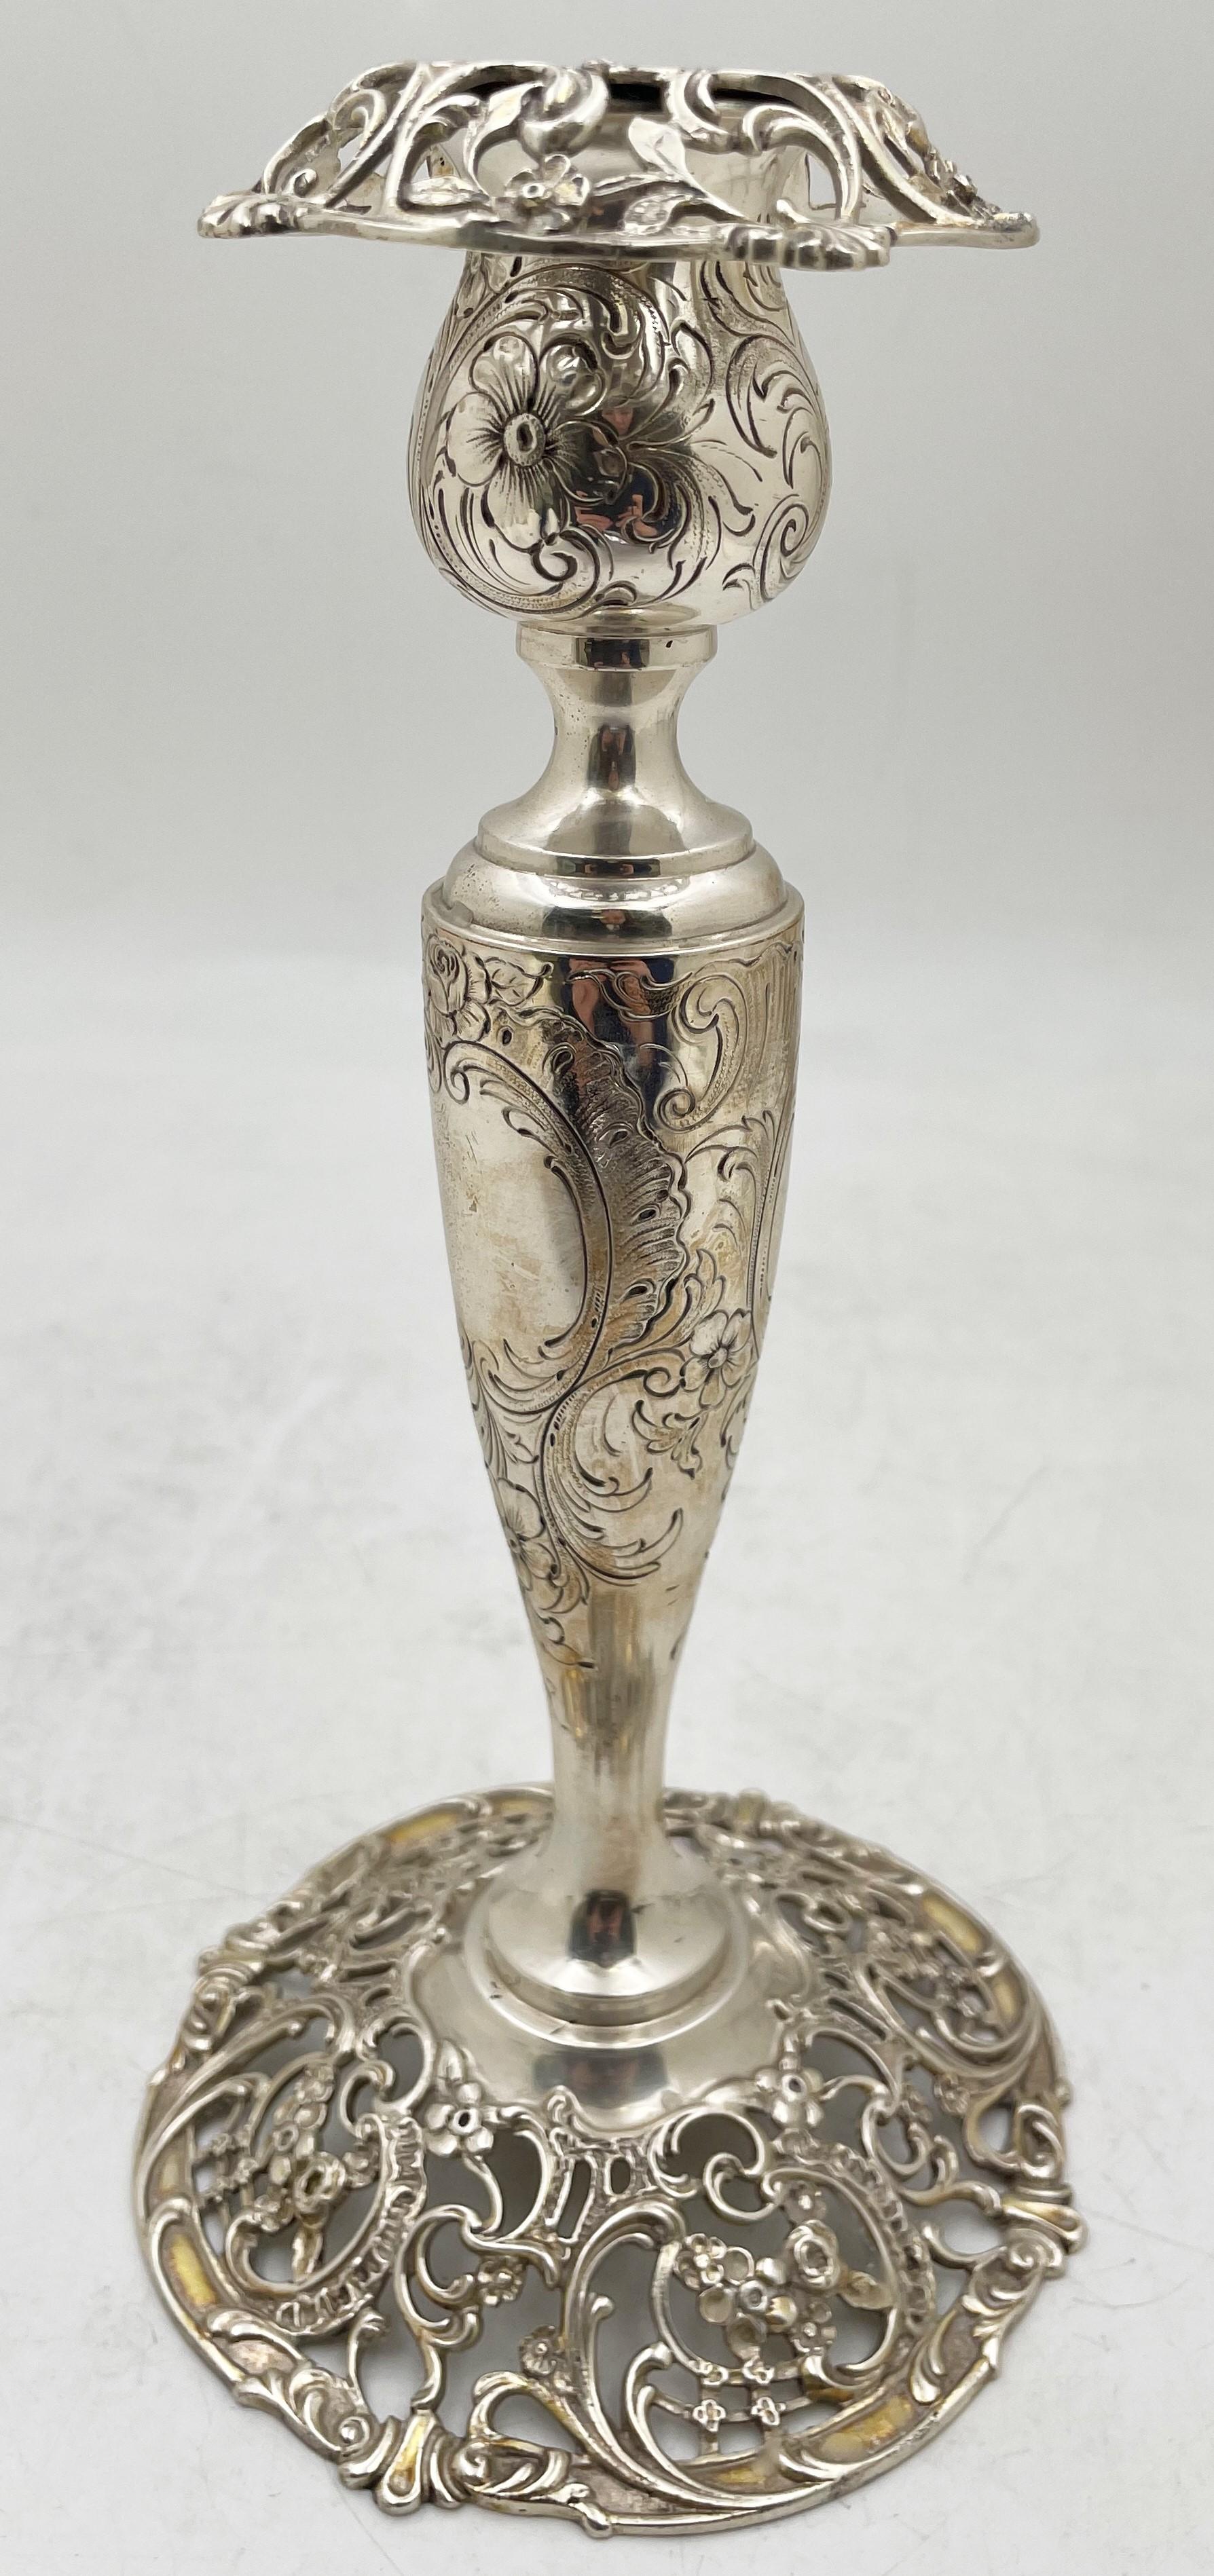 American Pair of Sterling Silver Candlesticks in Art Nouveau Style, Early 20th Century